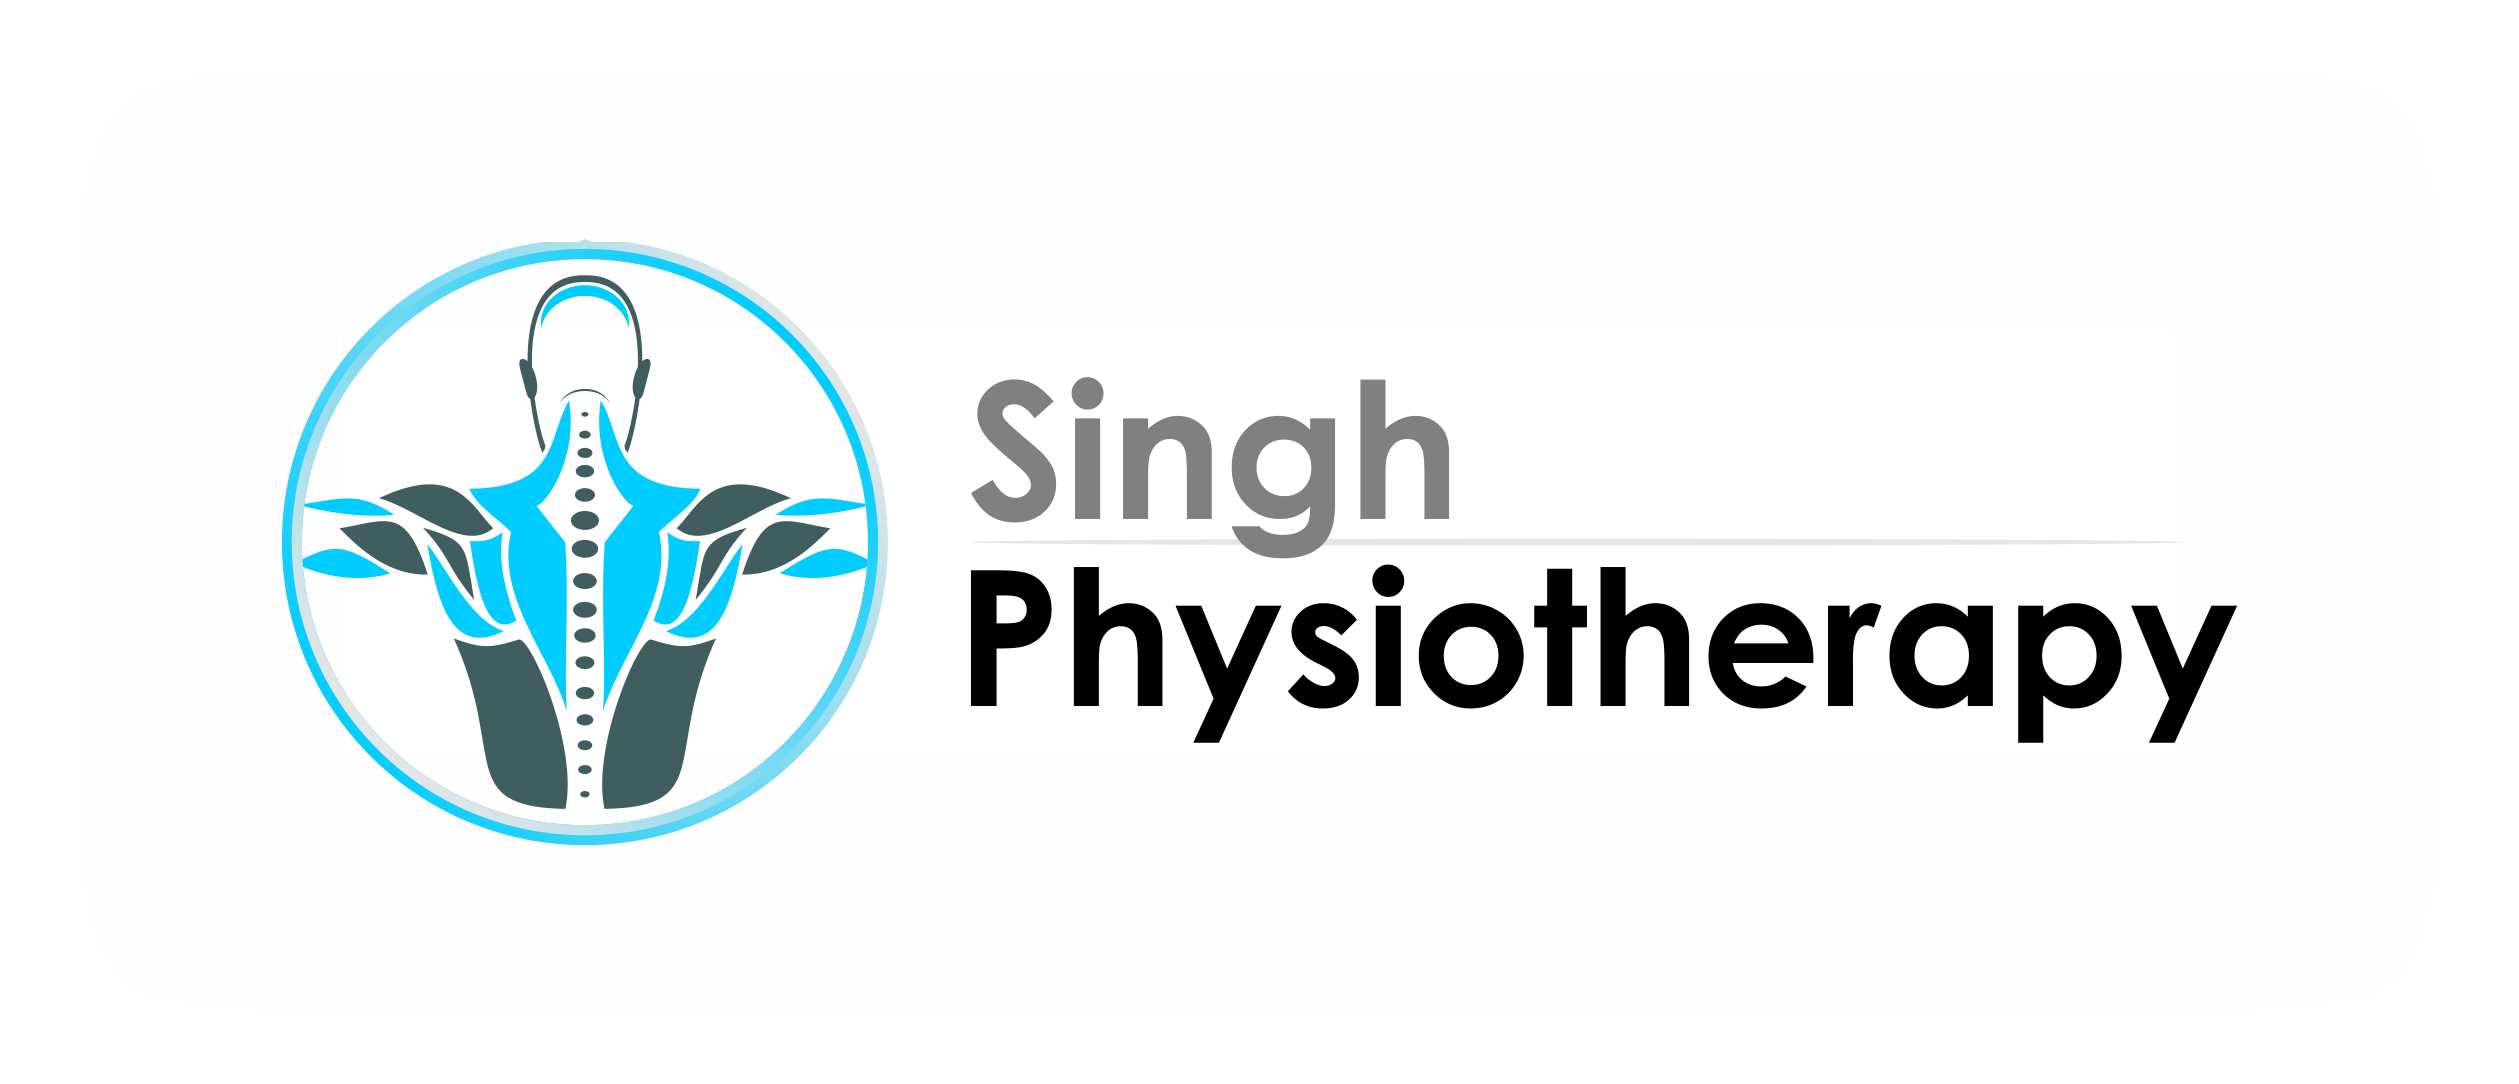 Singh Physiotherapy|Dentists|Medical Services